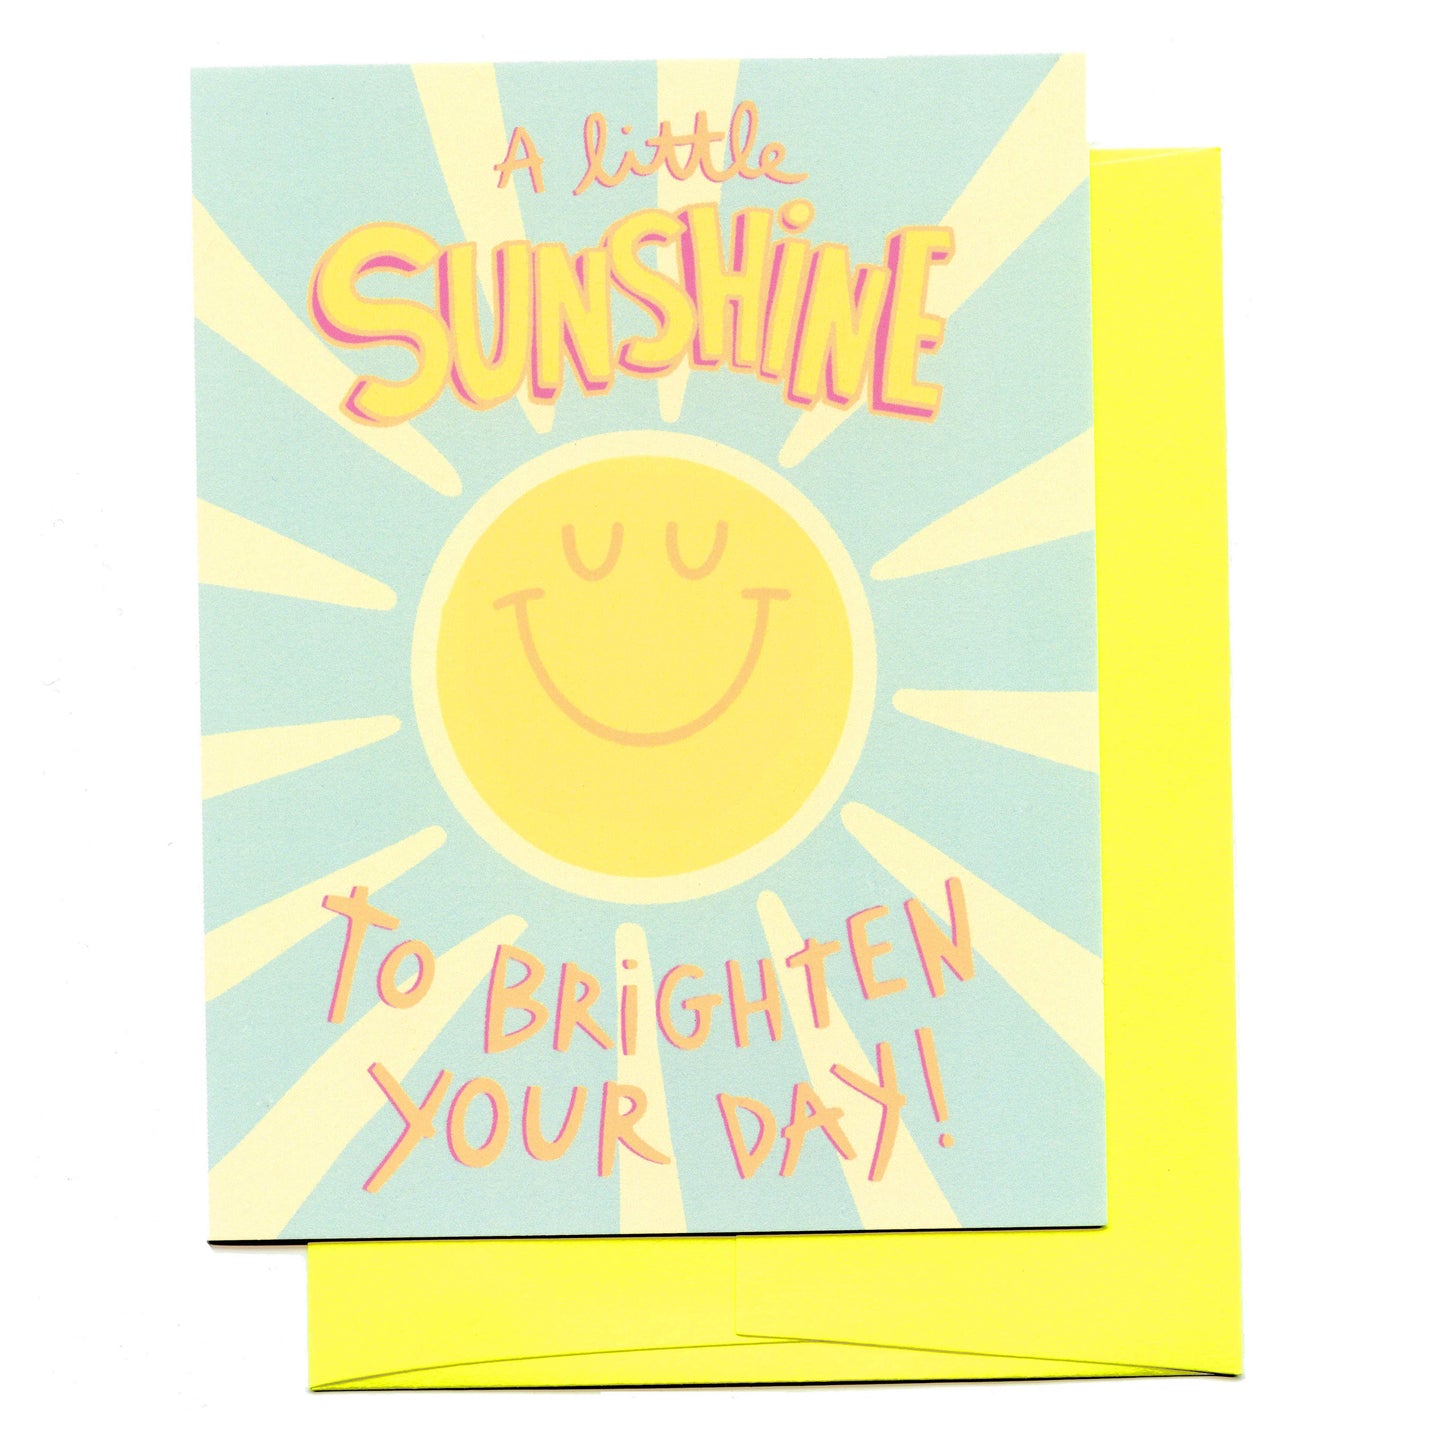 A Little SUNSHINE To Brighten Your Day, card!